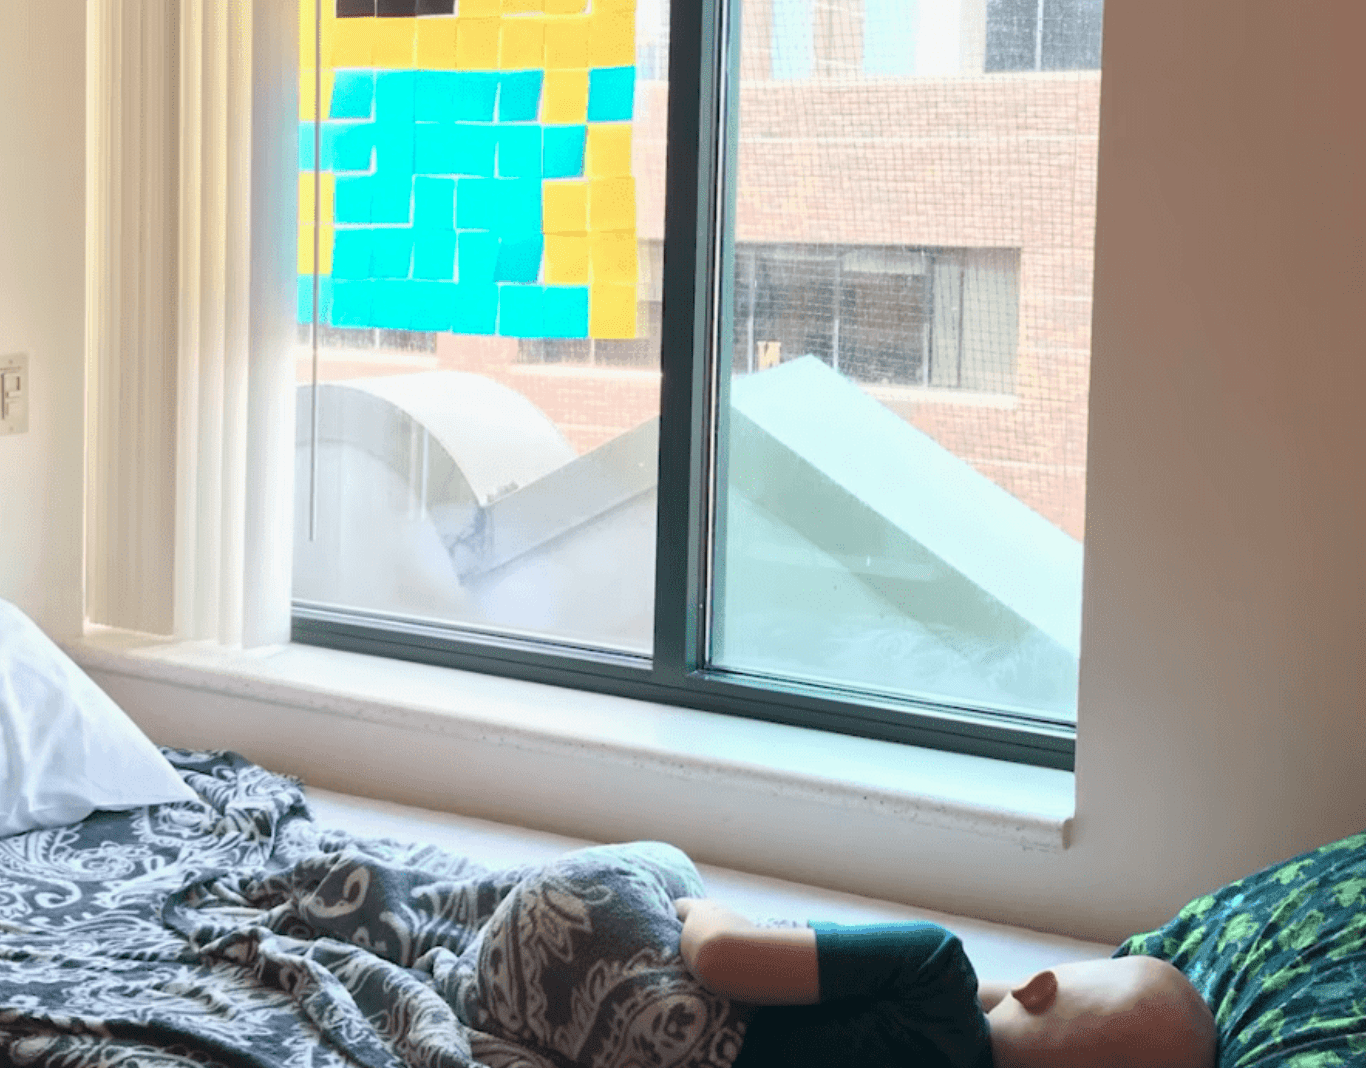 A boy battling cancer lies next to his creative Post-it note art | Photo: Youtube/Good Morning America